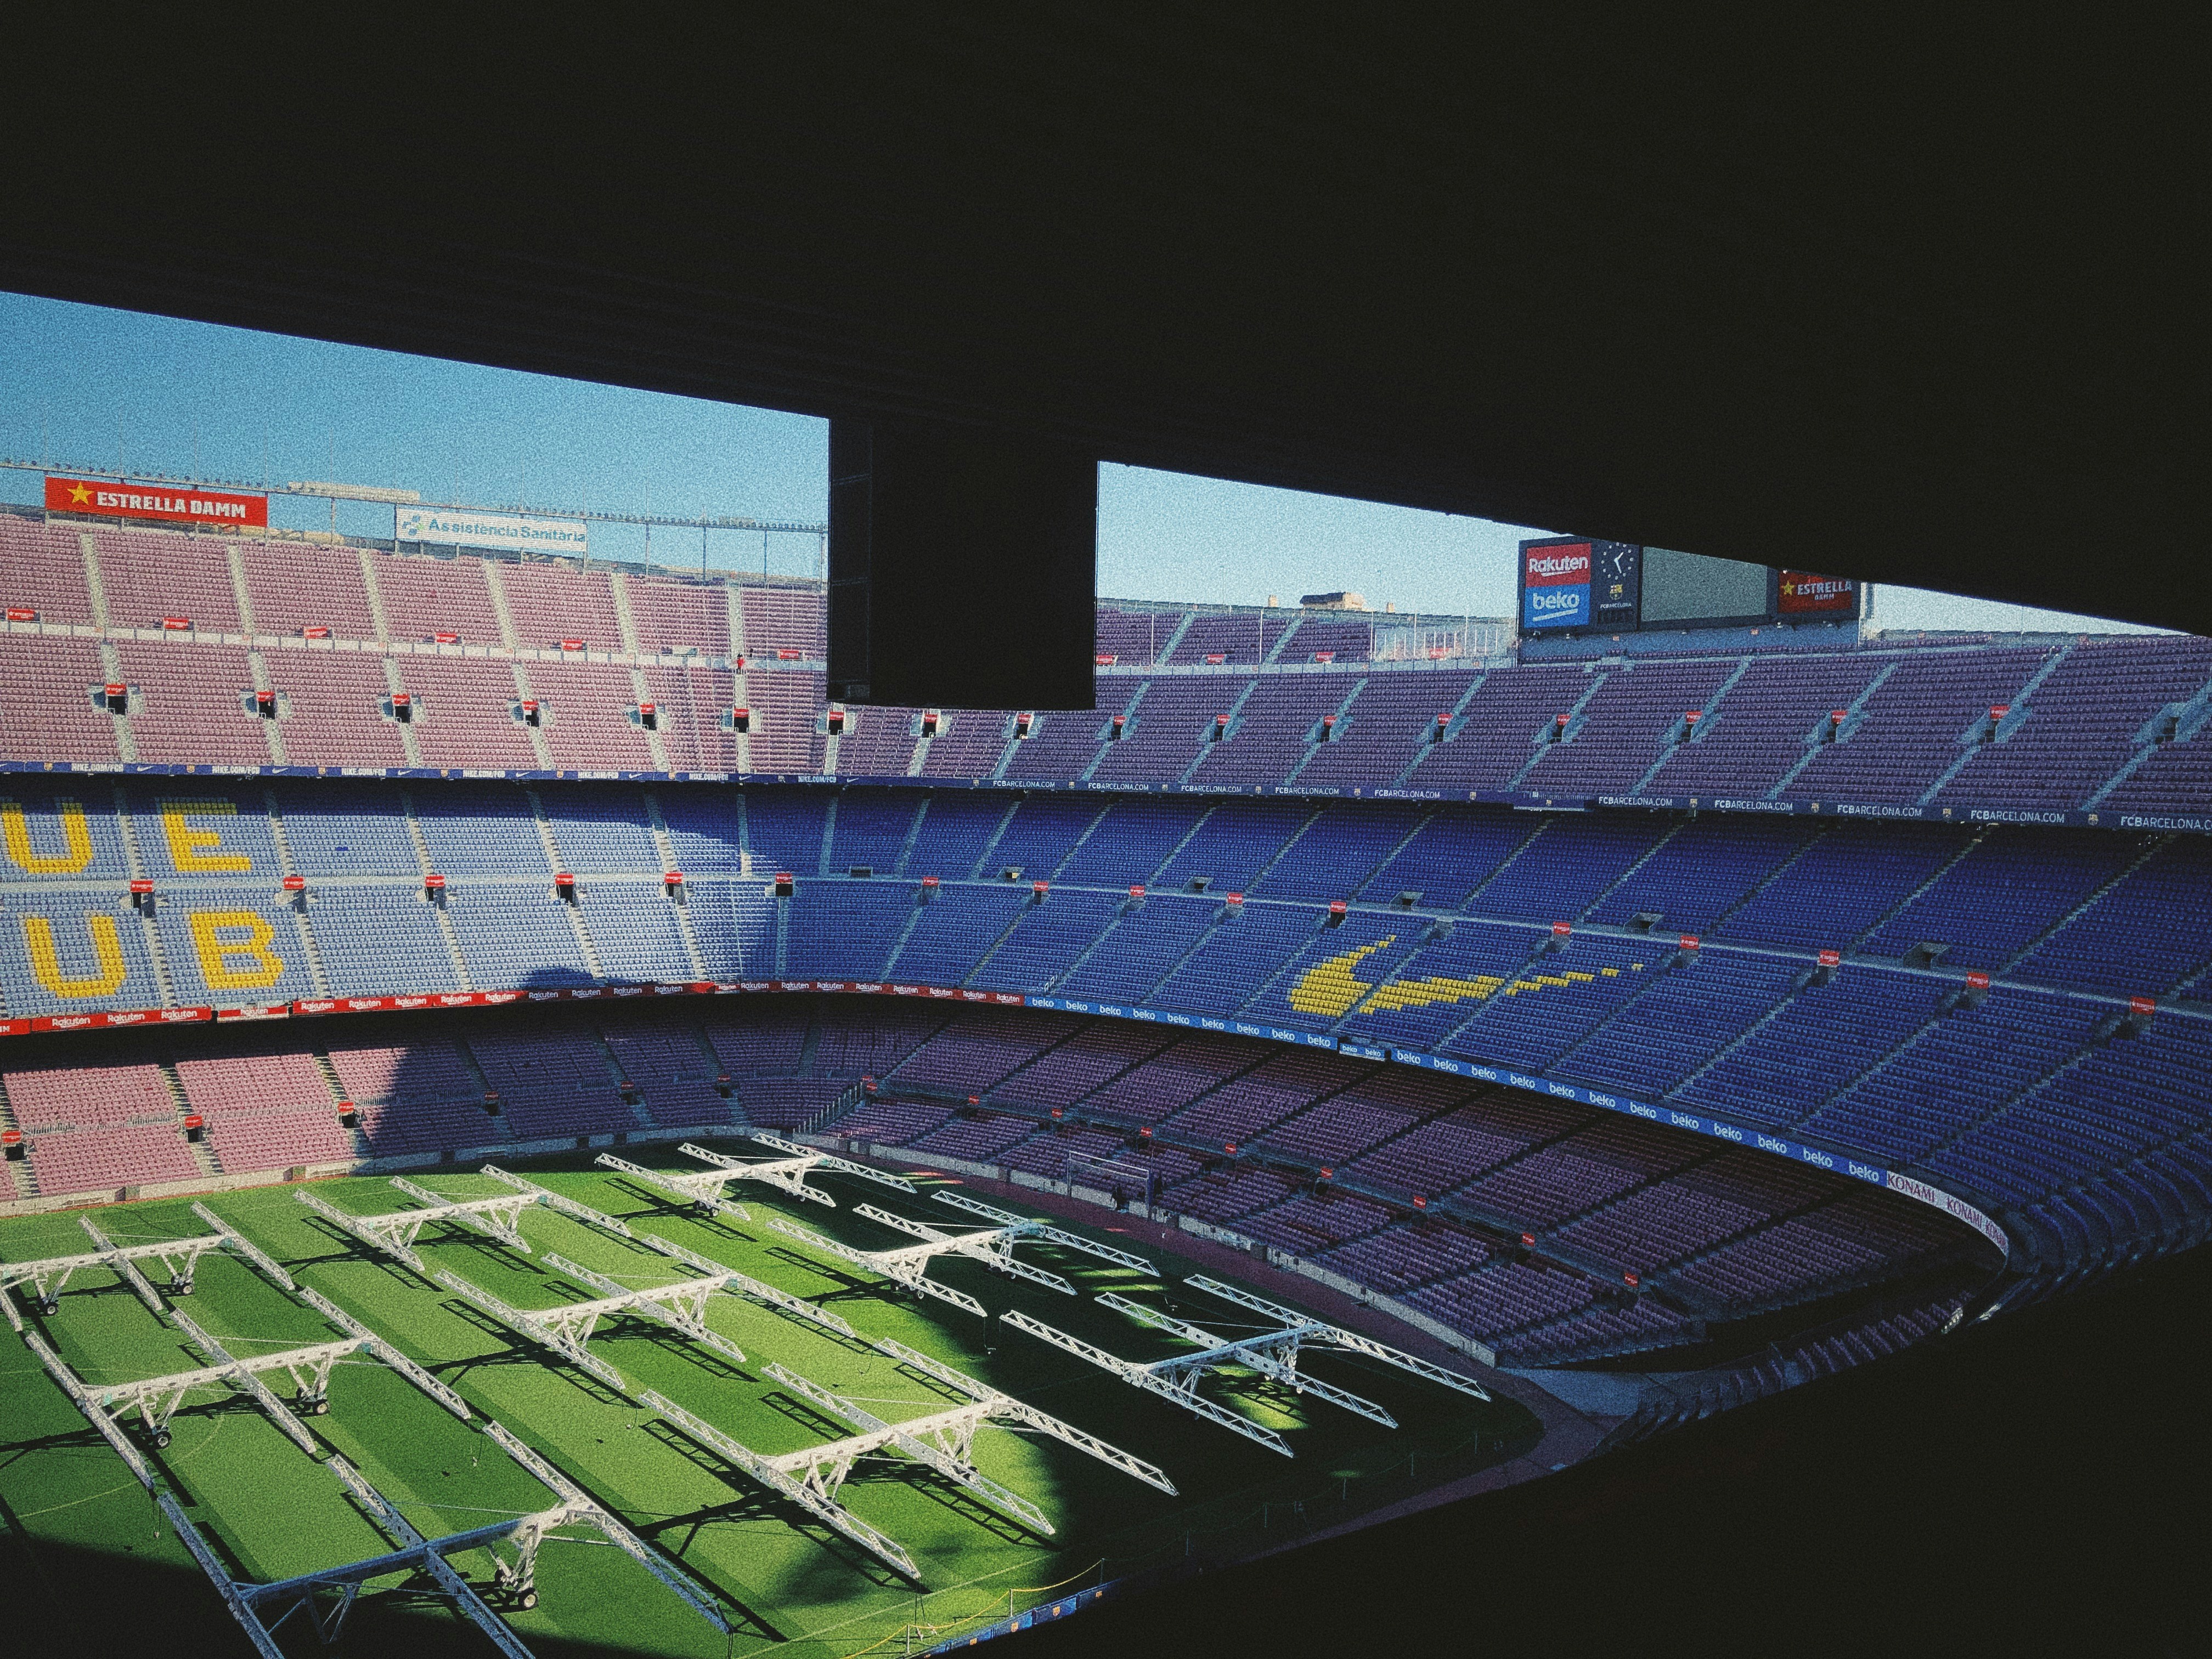 Camp Nou is the home stadium of FC Barcelona since its completion in 1957.